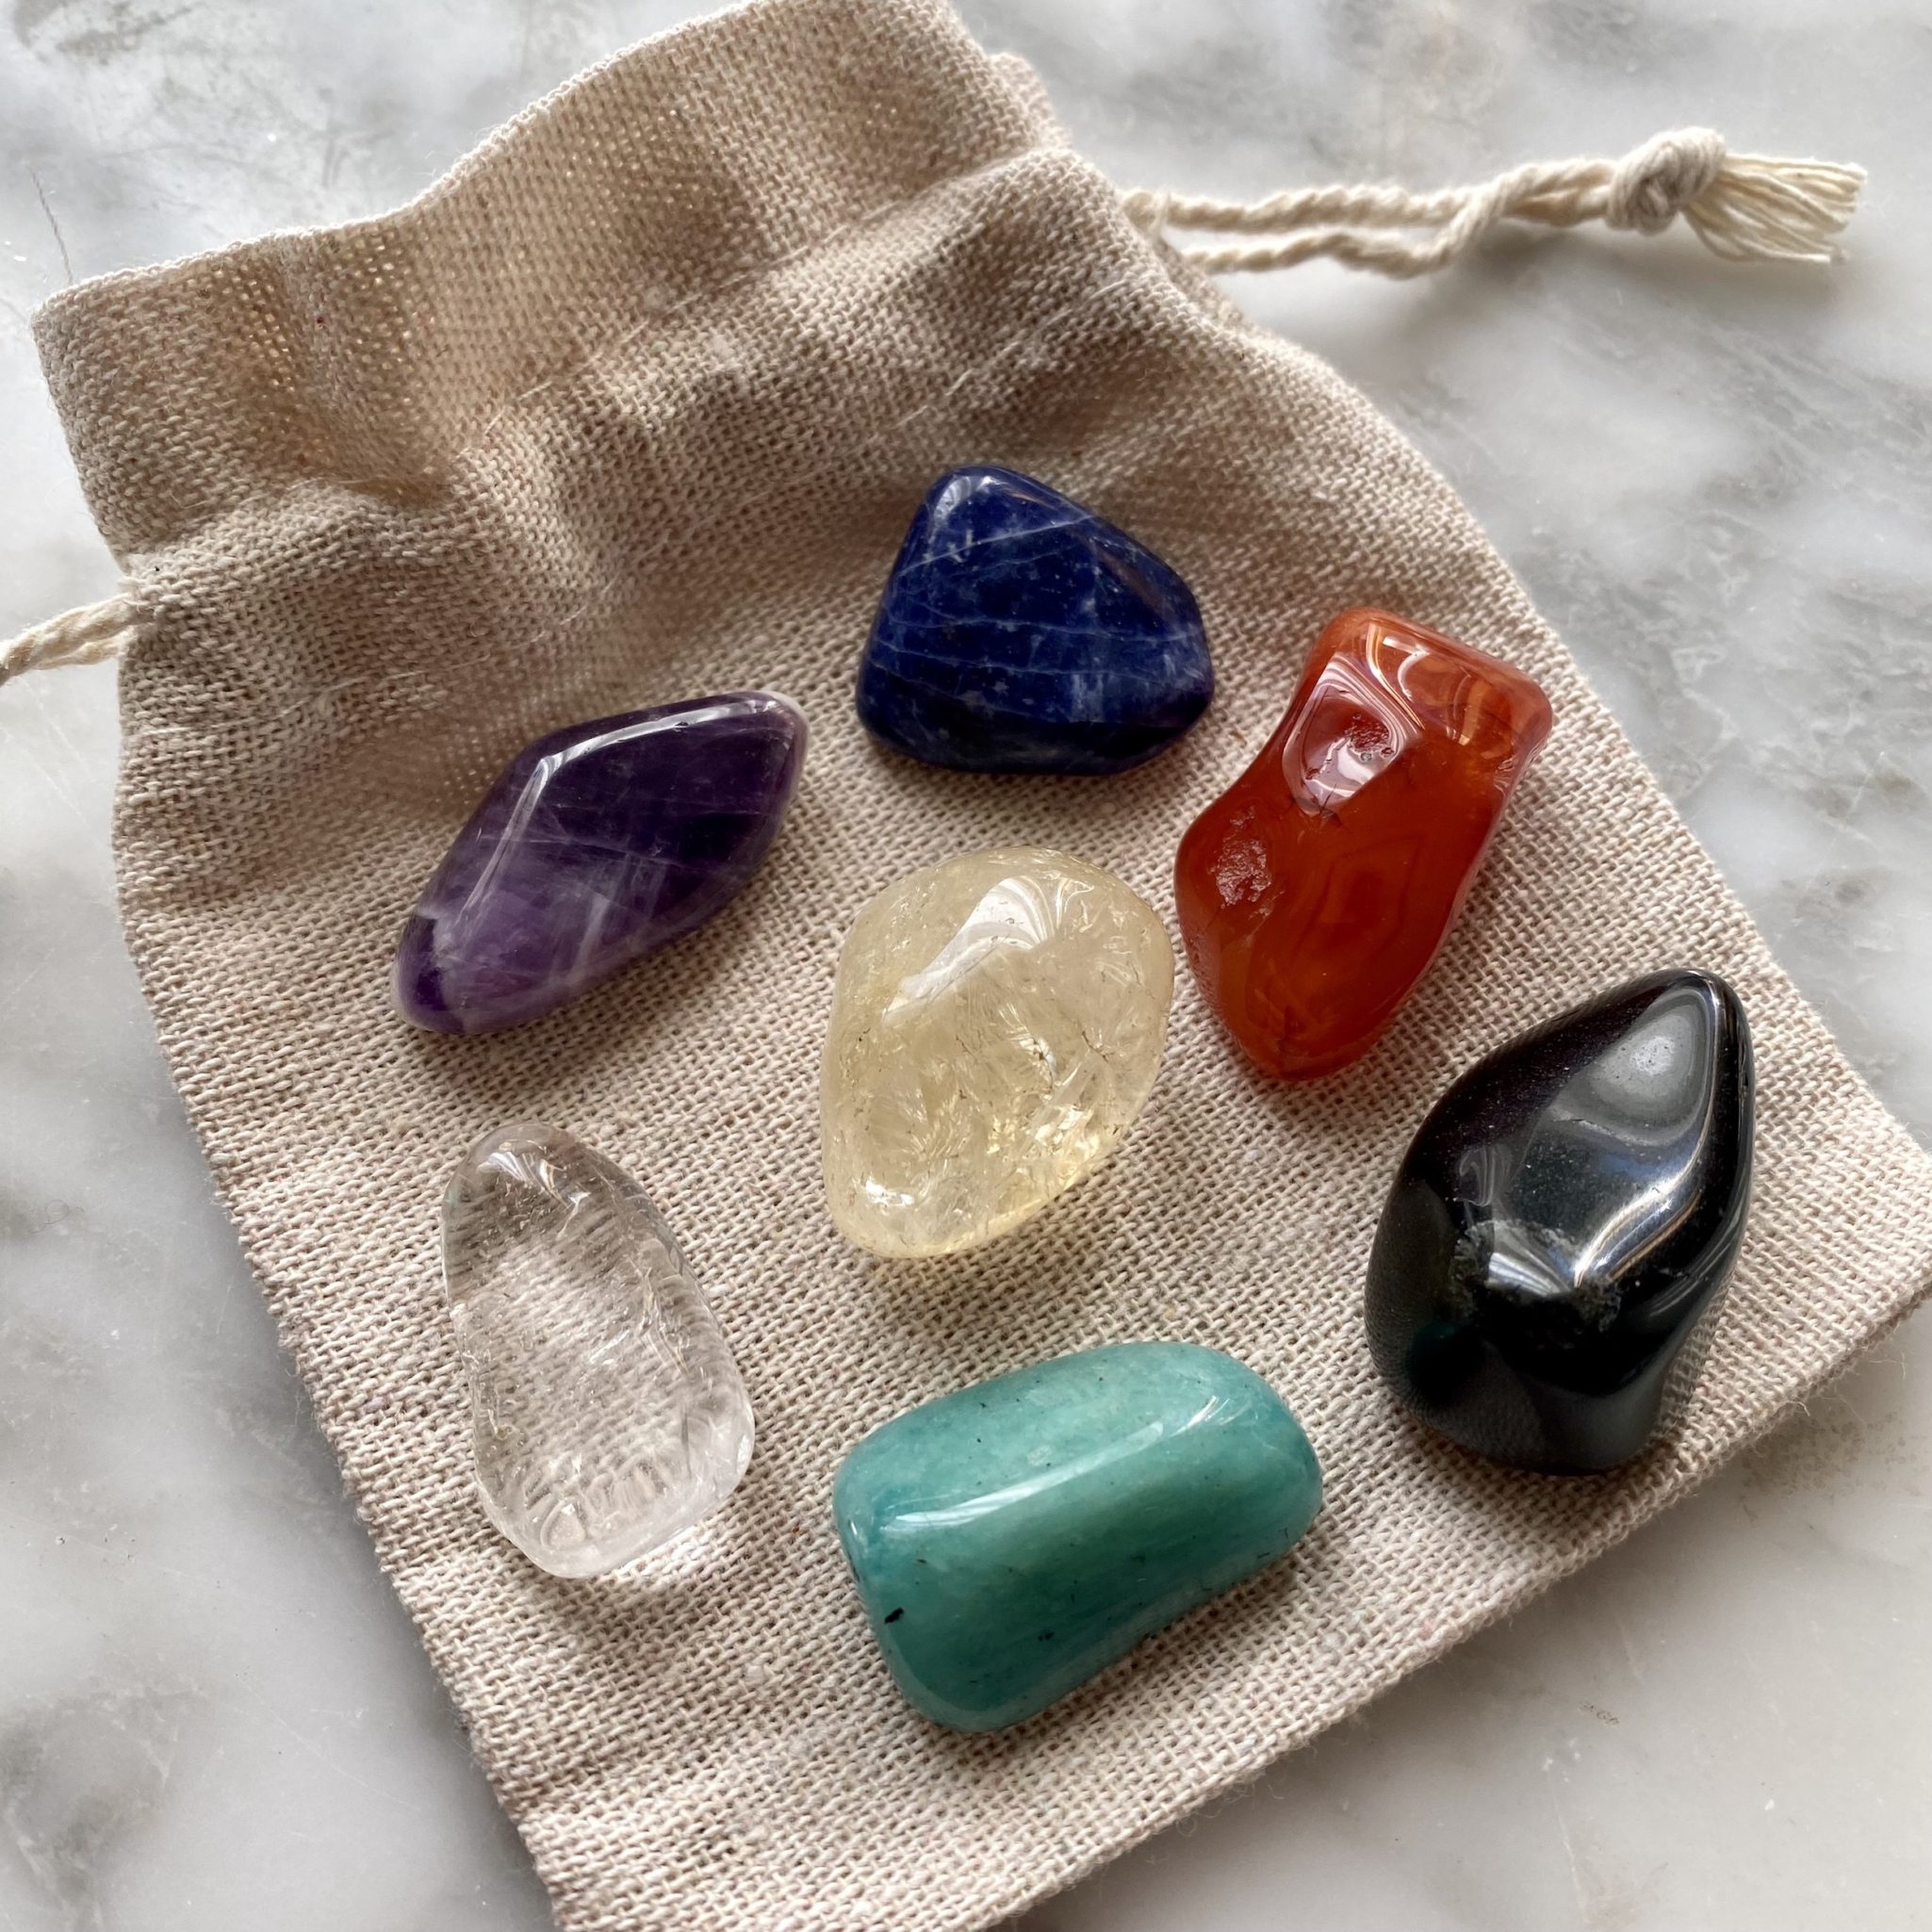 A Chakra Crystal Kit with seven chakra stones and a clear quartz tumbled stone